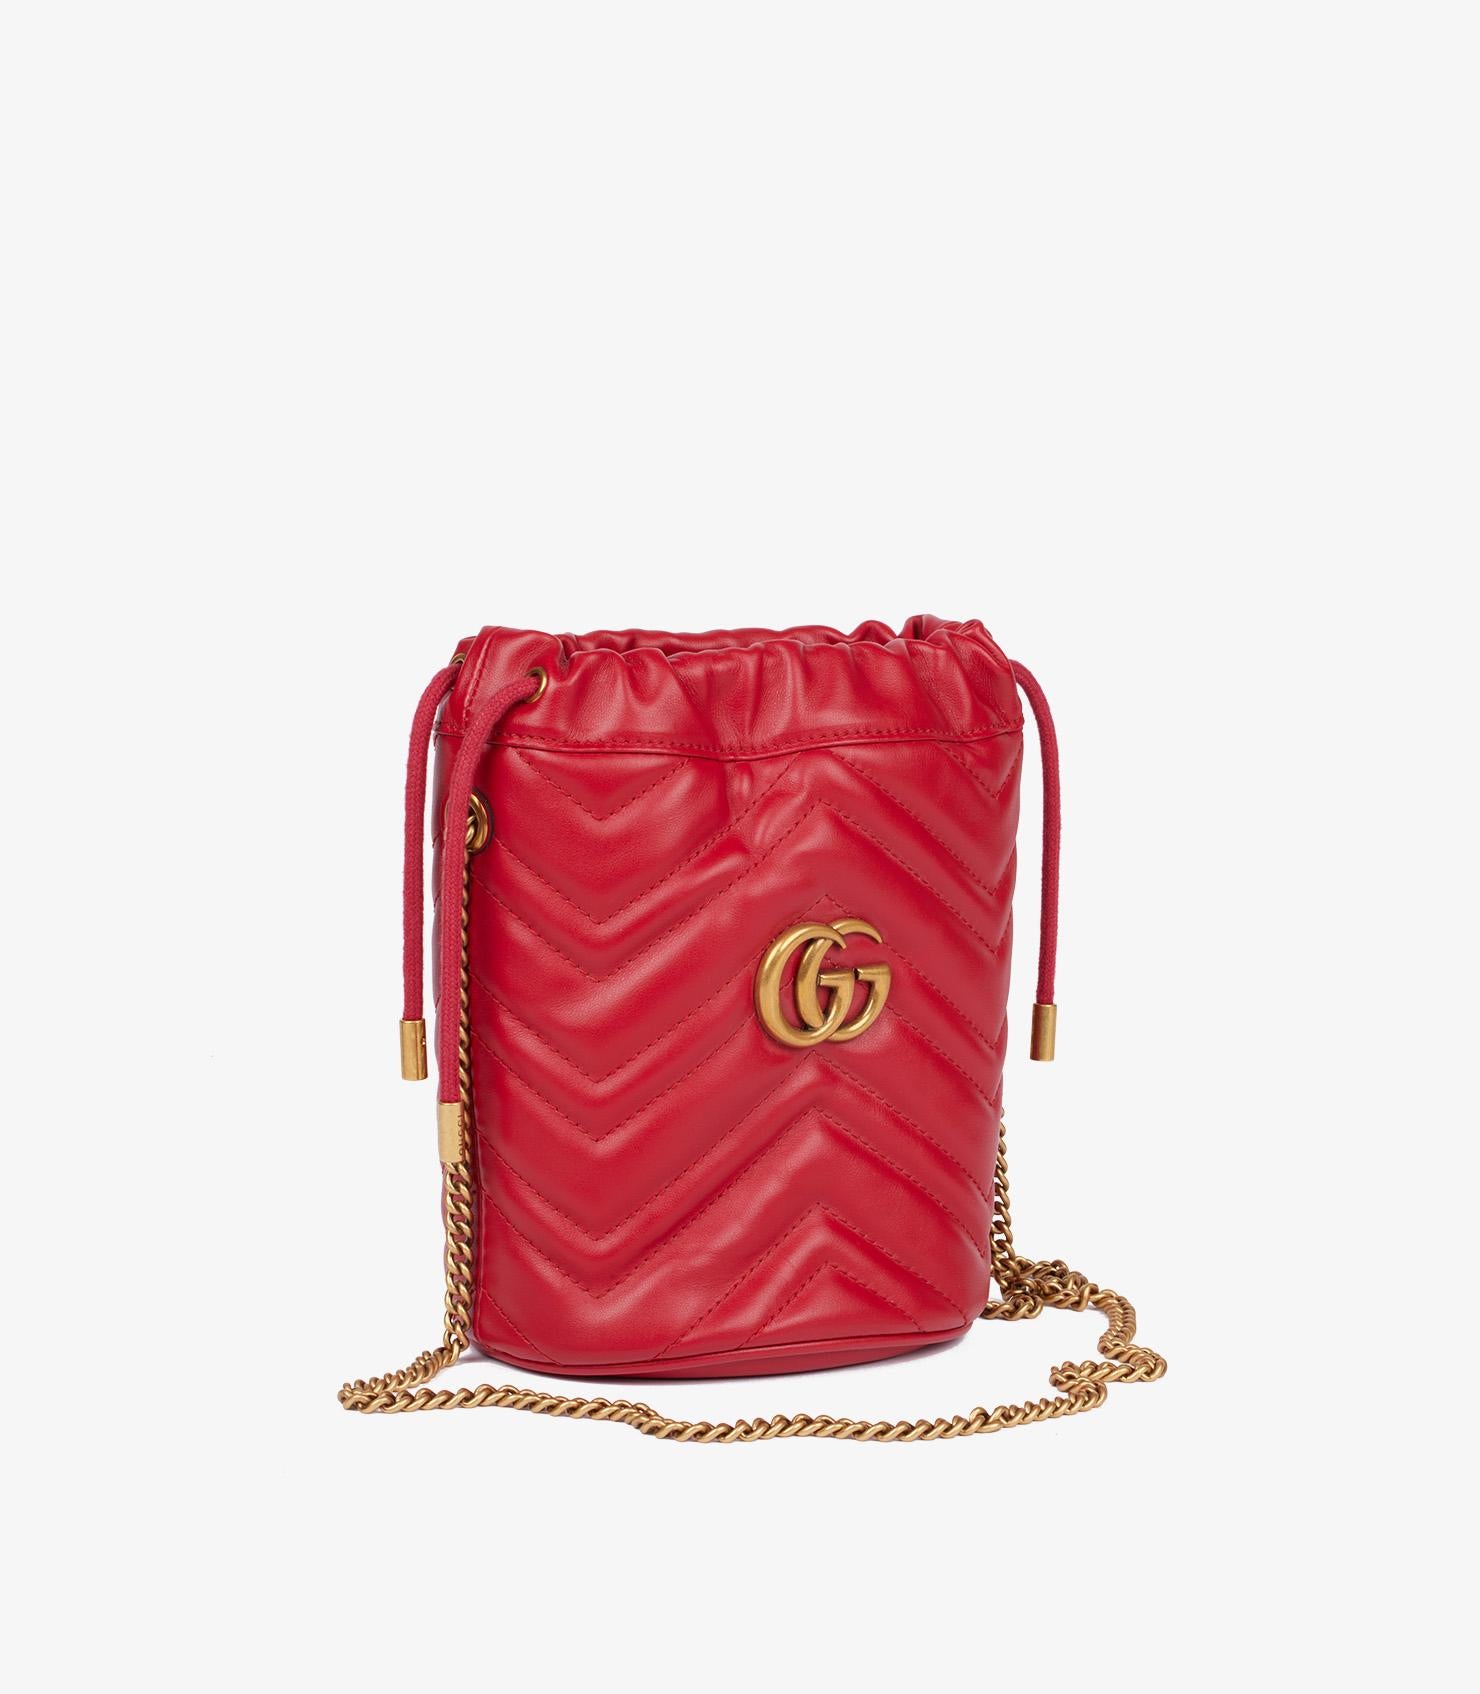 Gucci Red Chevron Quilted Calfskin Leather GG Marmont Mini Bucket Bag In Excellent Condition For Sale In Bishop's Stortford, Hertfordshire